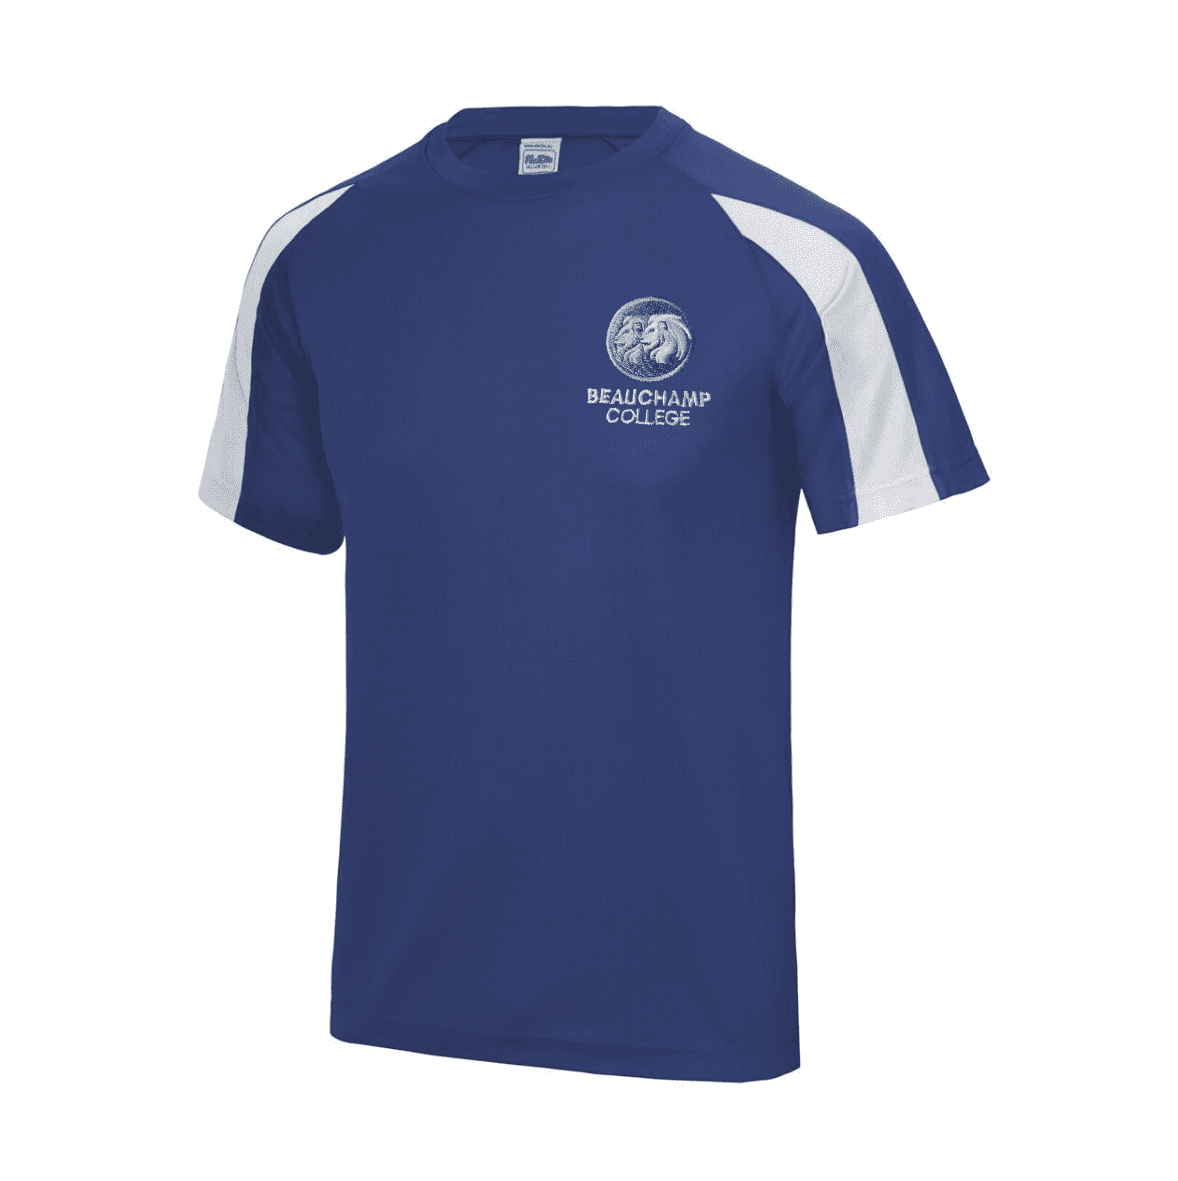 Beauchamp College Games Tee Royal/White w/Logo - Schoolwear Solutions